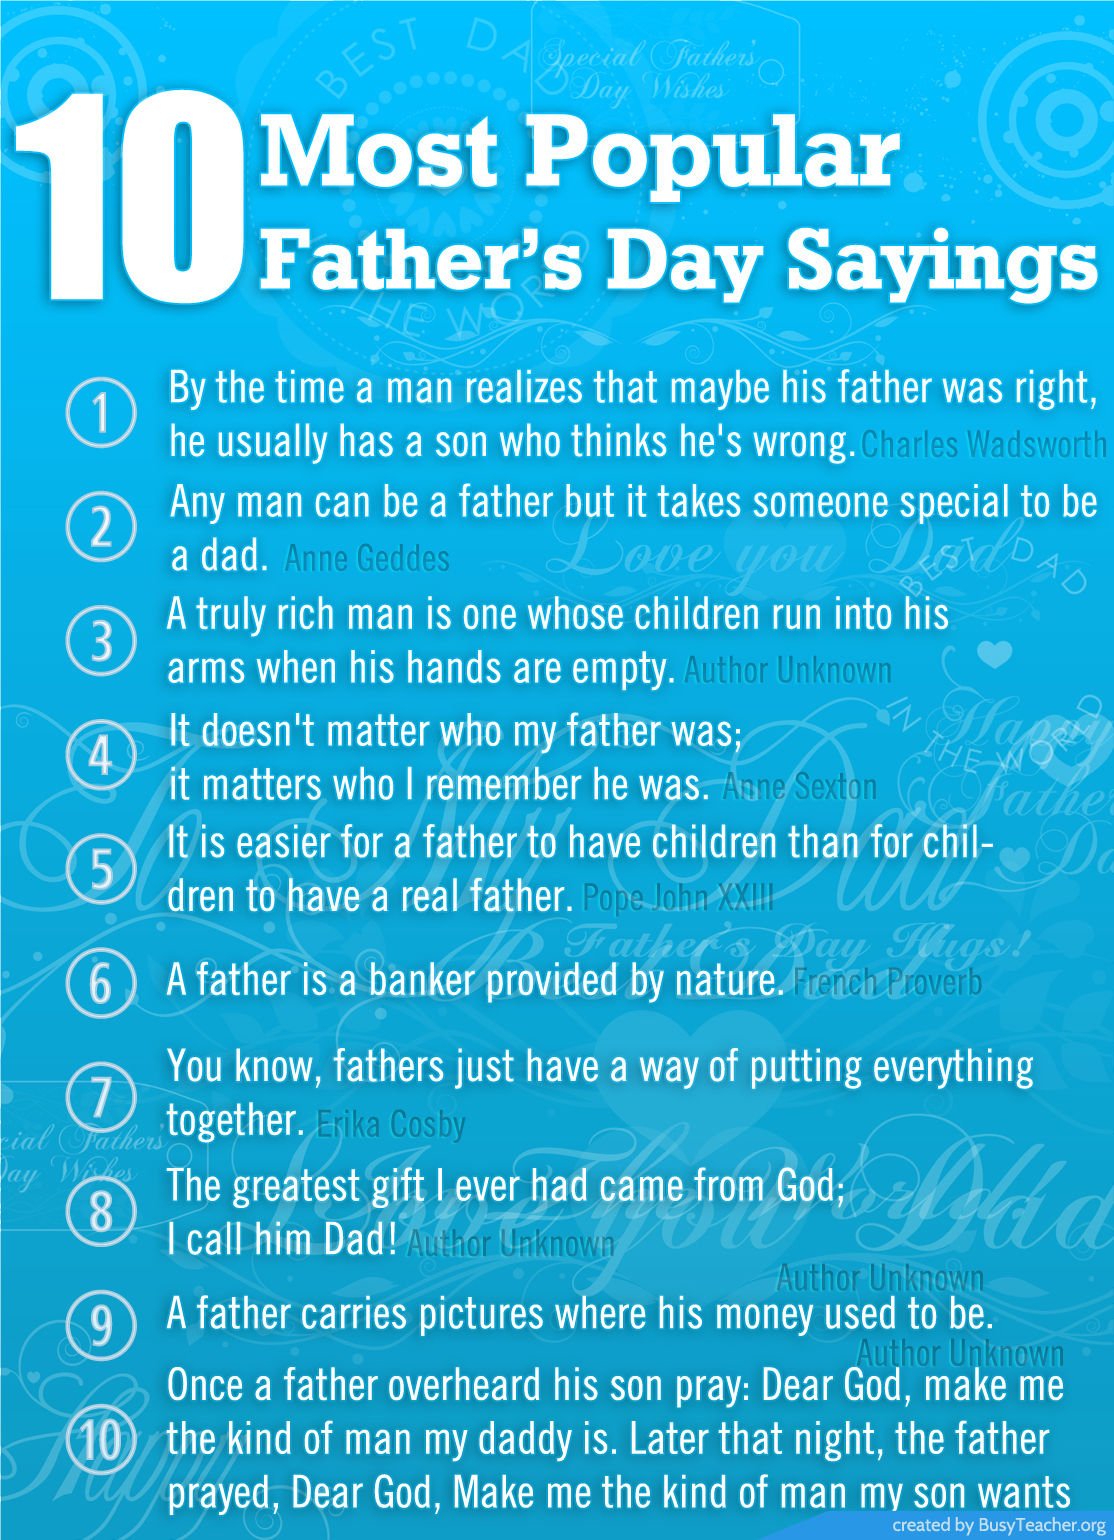 10 Most Popular Father's Day Sayings: Poster